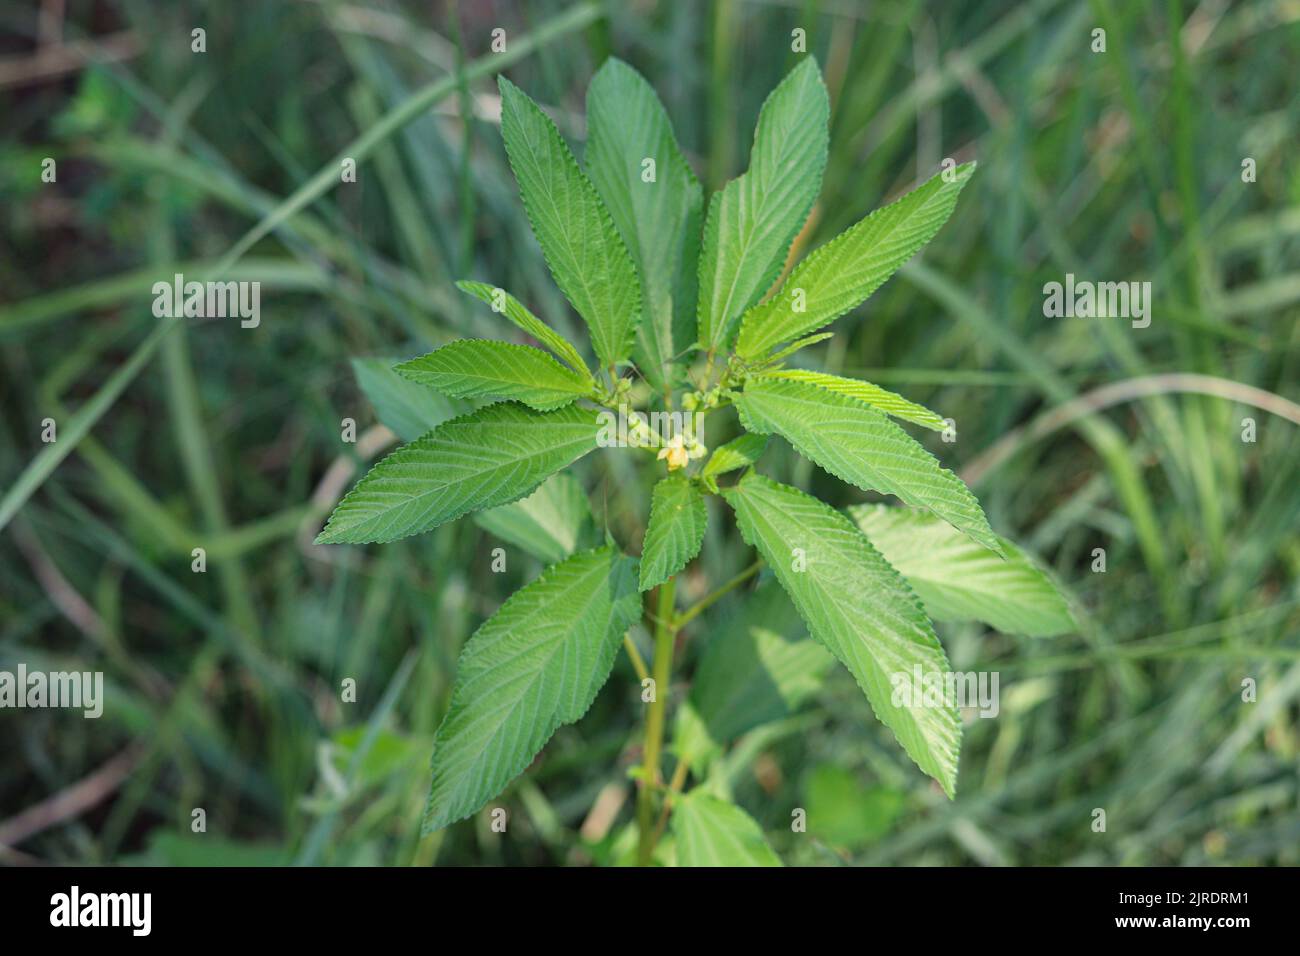 Green leaves of Jute mallow or nalta jute (Corchorus olitorius) at a farm on the west bank of Nile in Luxor, Egypt Stock Photo